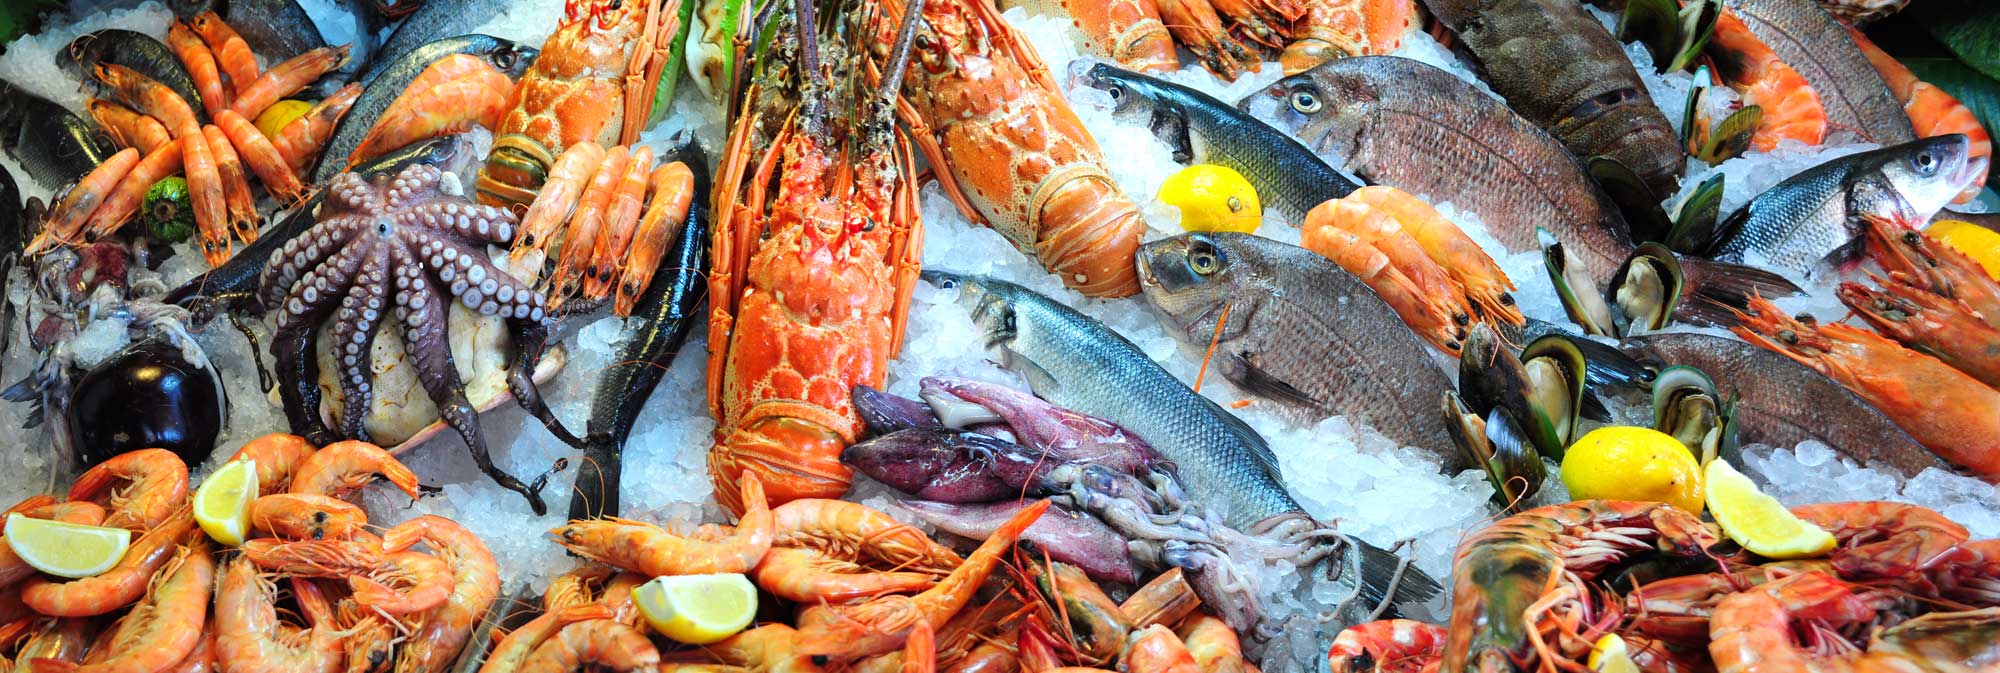 Frozen Foods Seafood Customs Clearance